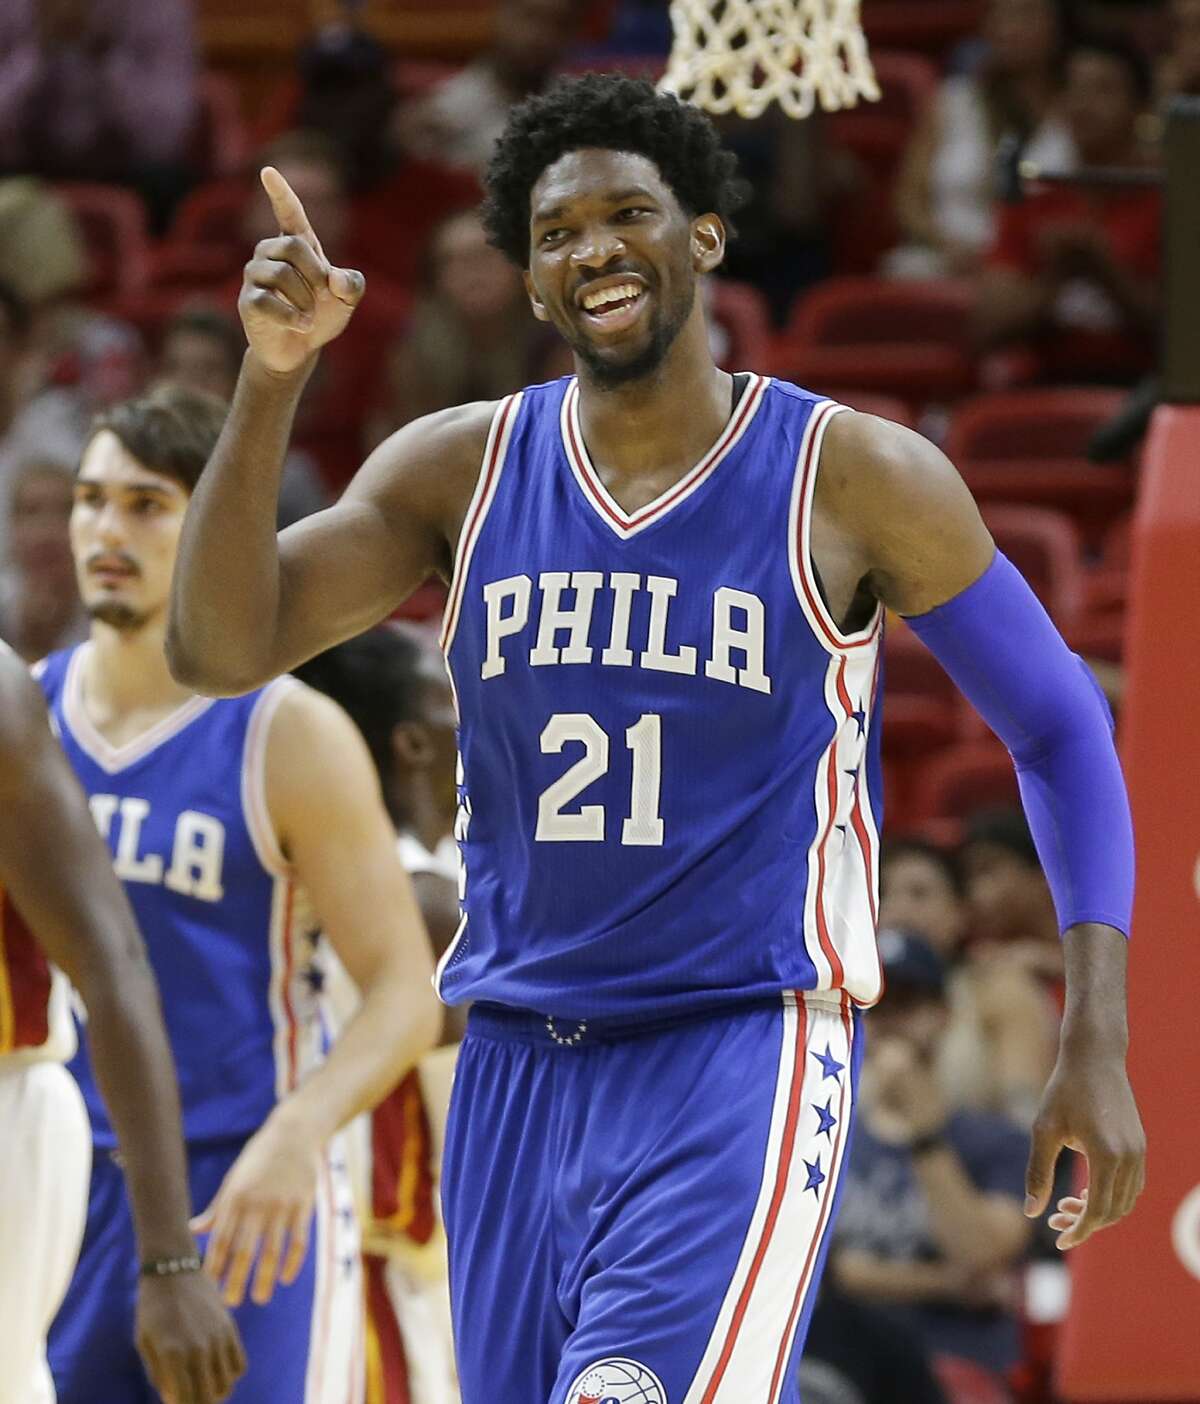 FILE - In this Oct. 21, 2016, file photo, Philadelphia 76ers center Joel Embiid celebrates after scoring against the Miami Heat during the second half of an NBA preseason basketball game, in Miami. Embiid has the joyous personality of a kid himself, and social media posts that include him crushing on Rihanna or teasing an Australian-born teammate that he'll get deported if Donald Trump is elected president of the United States made him beloved already in Philly. (AP Photo/Alan Diaz, File)